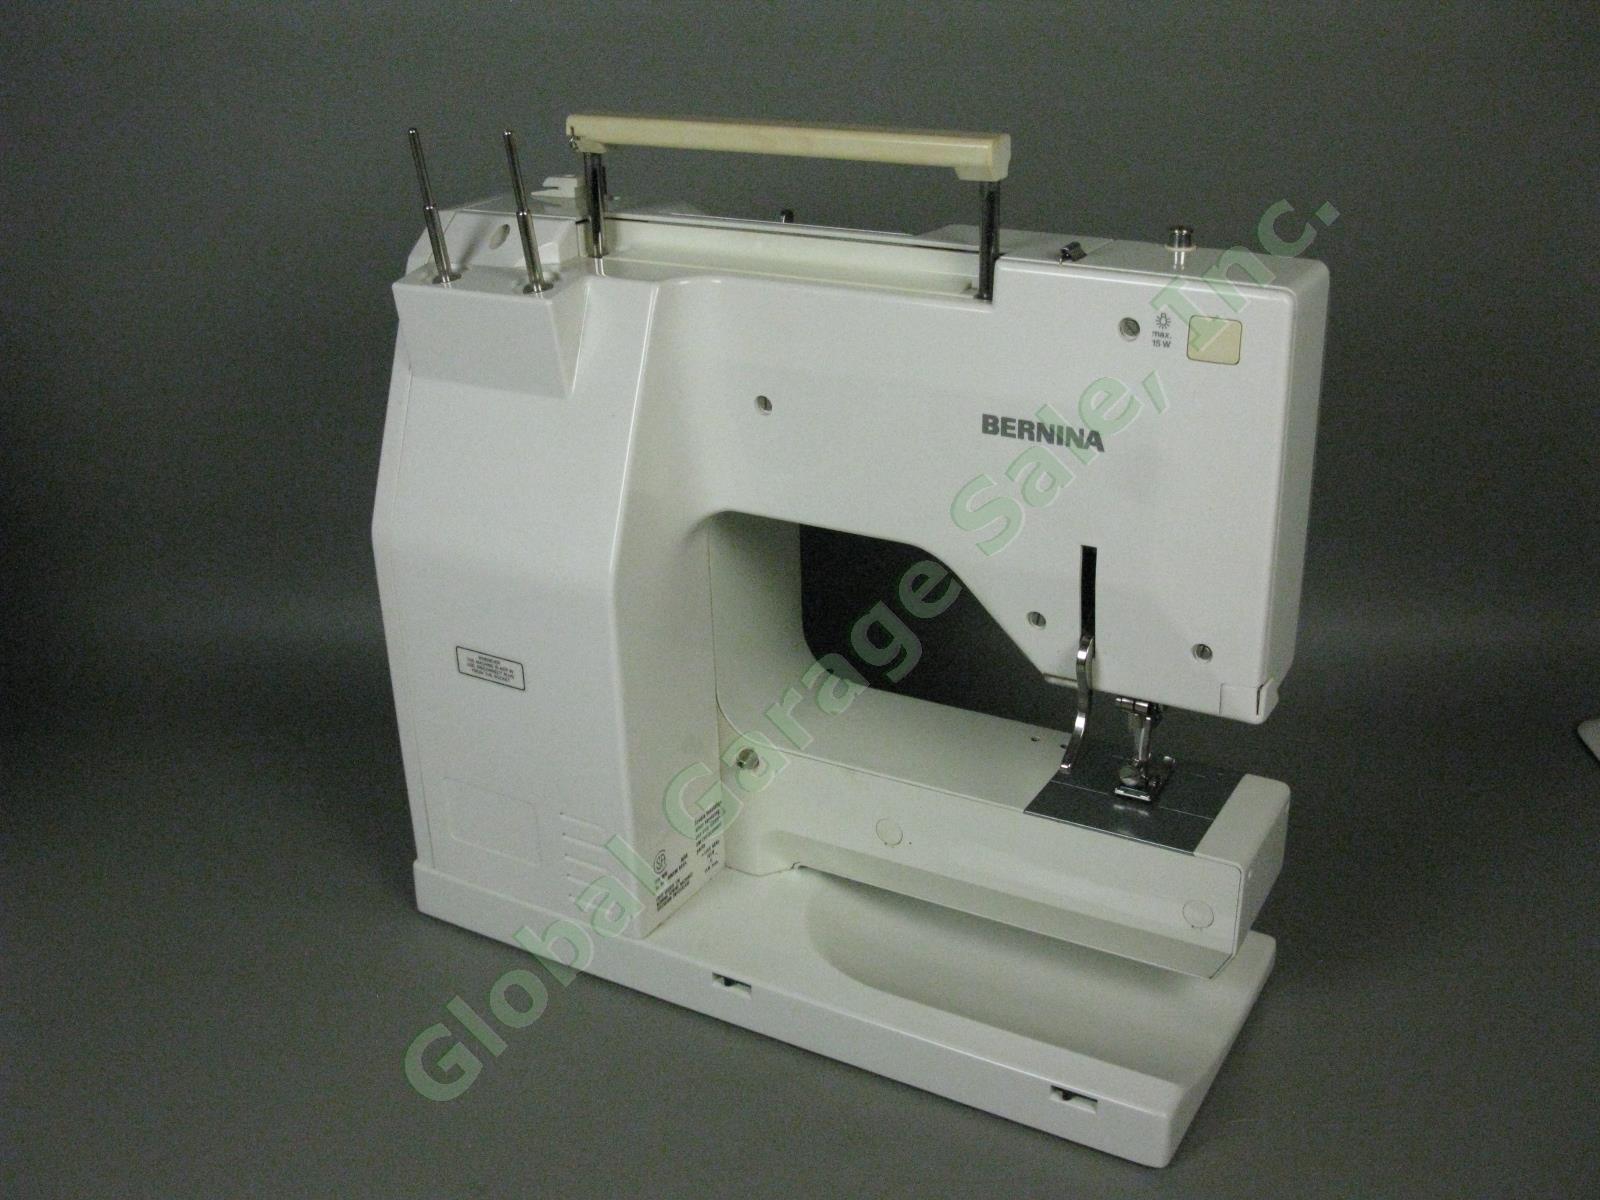 Bernina 1010 Sewing Machine w/Slide-On Extension Table Pedal Feet Manual Cover + 3